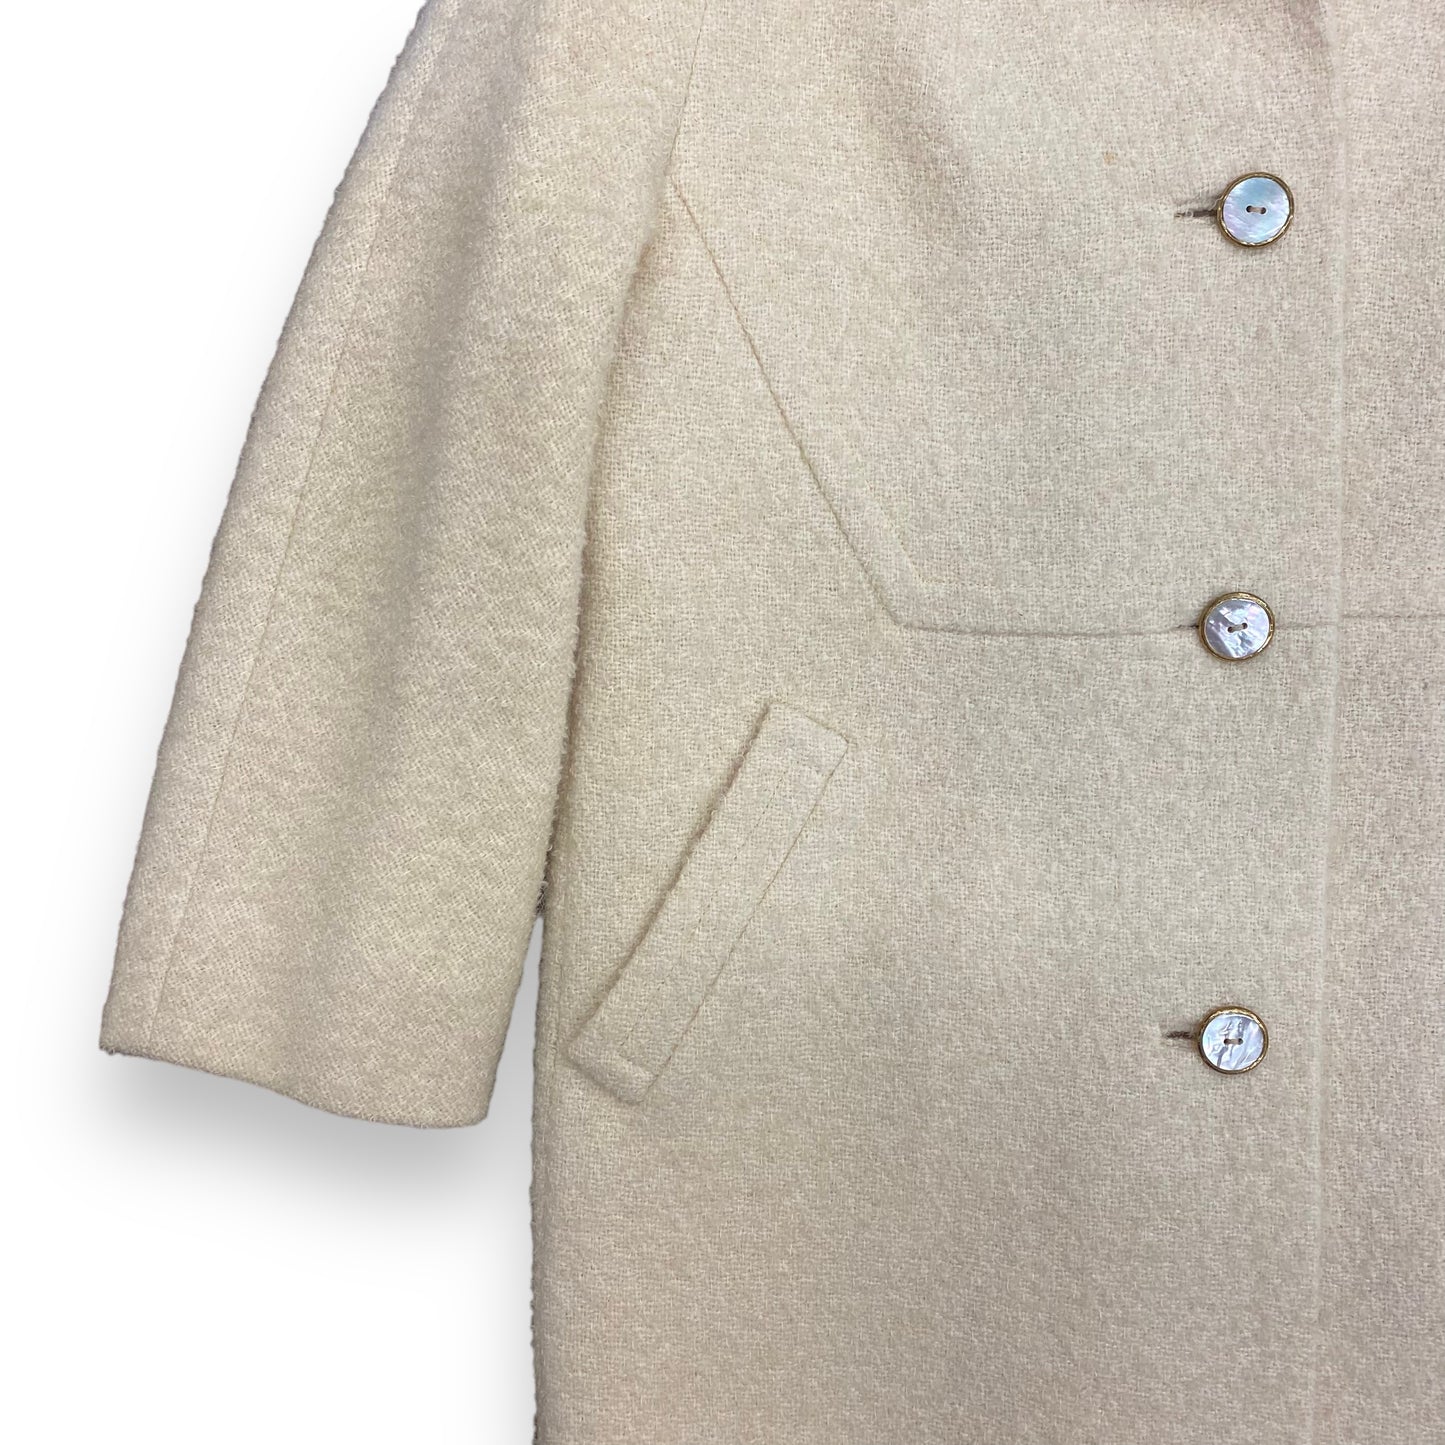 1970s The Addis Co. Syracuse White Wool Overcoat - Size Small